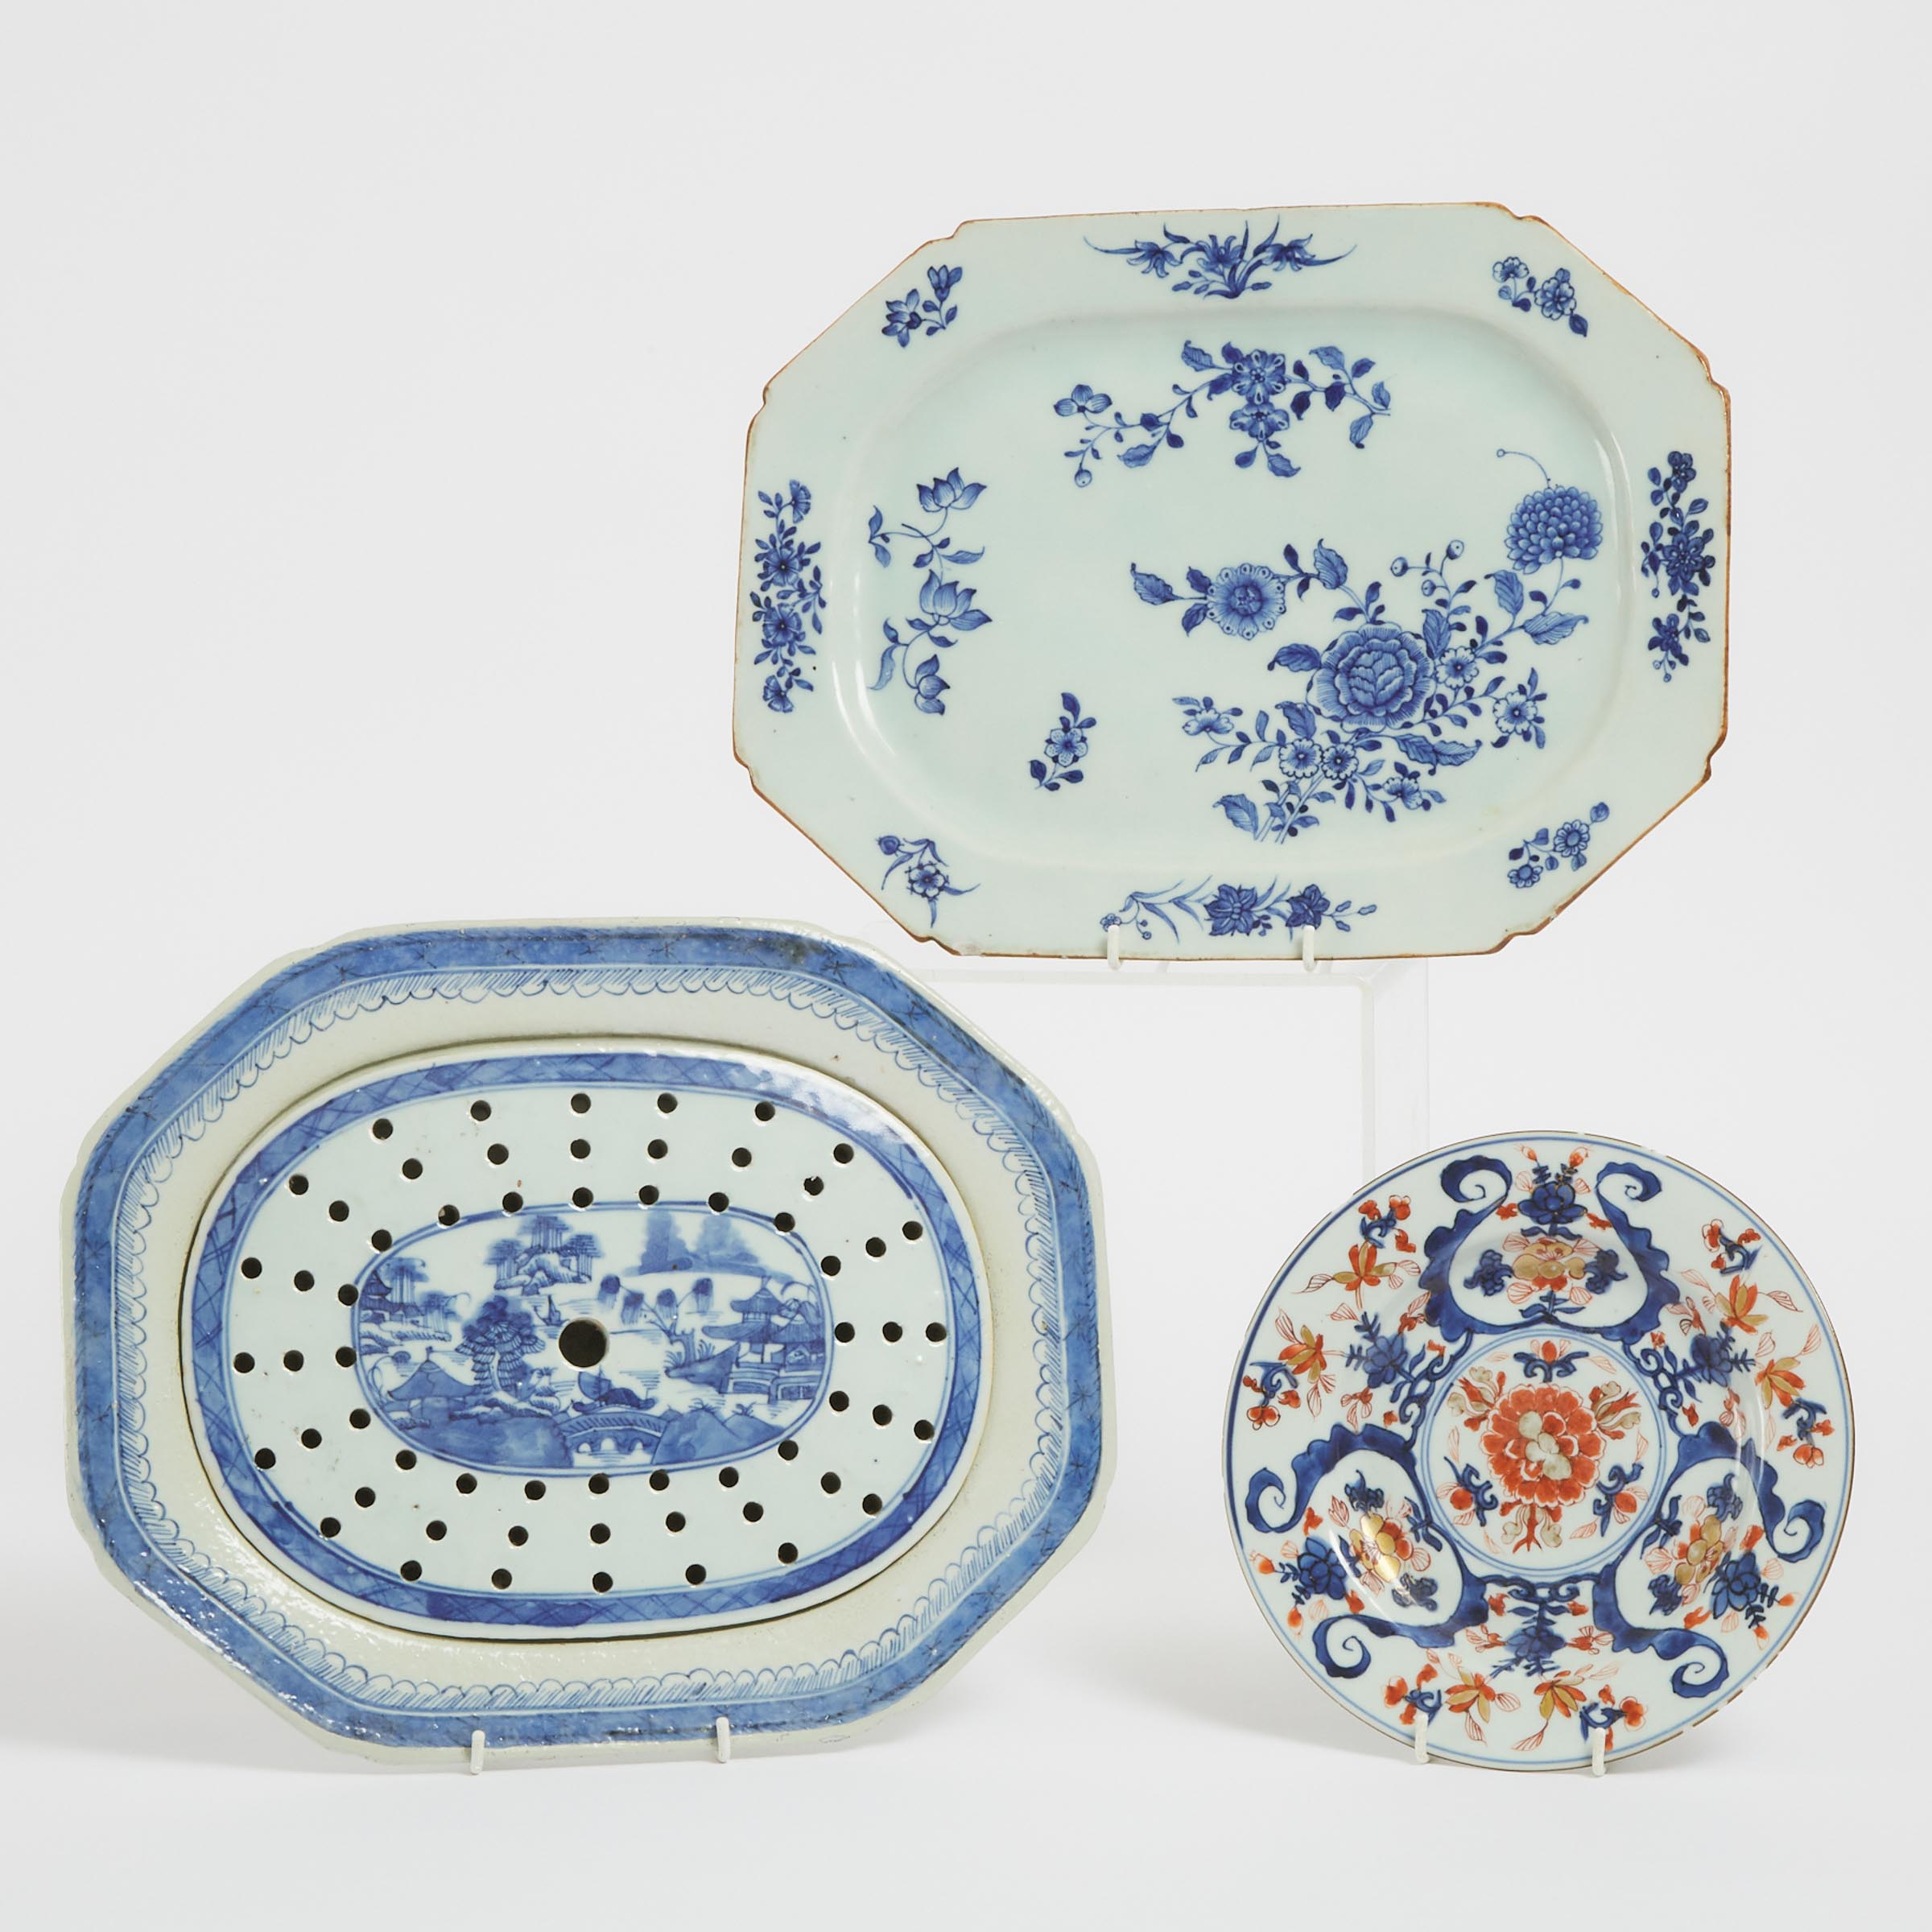 A Chinese Export Blue and White Platter, Together With a Meat Dish and Mazarine and an Imari Plate, 18th/19th Century